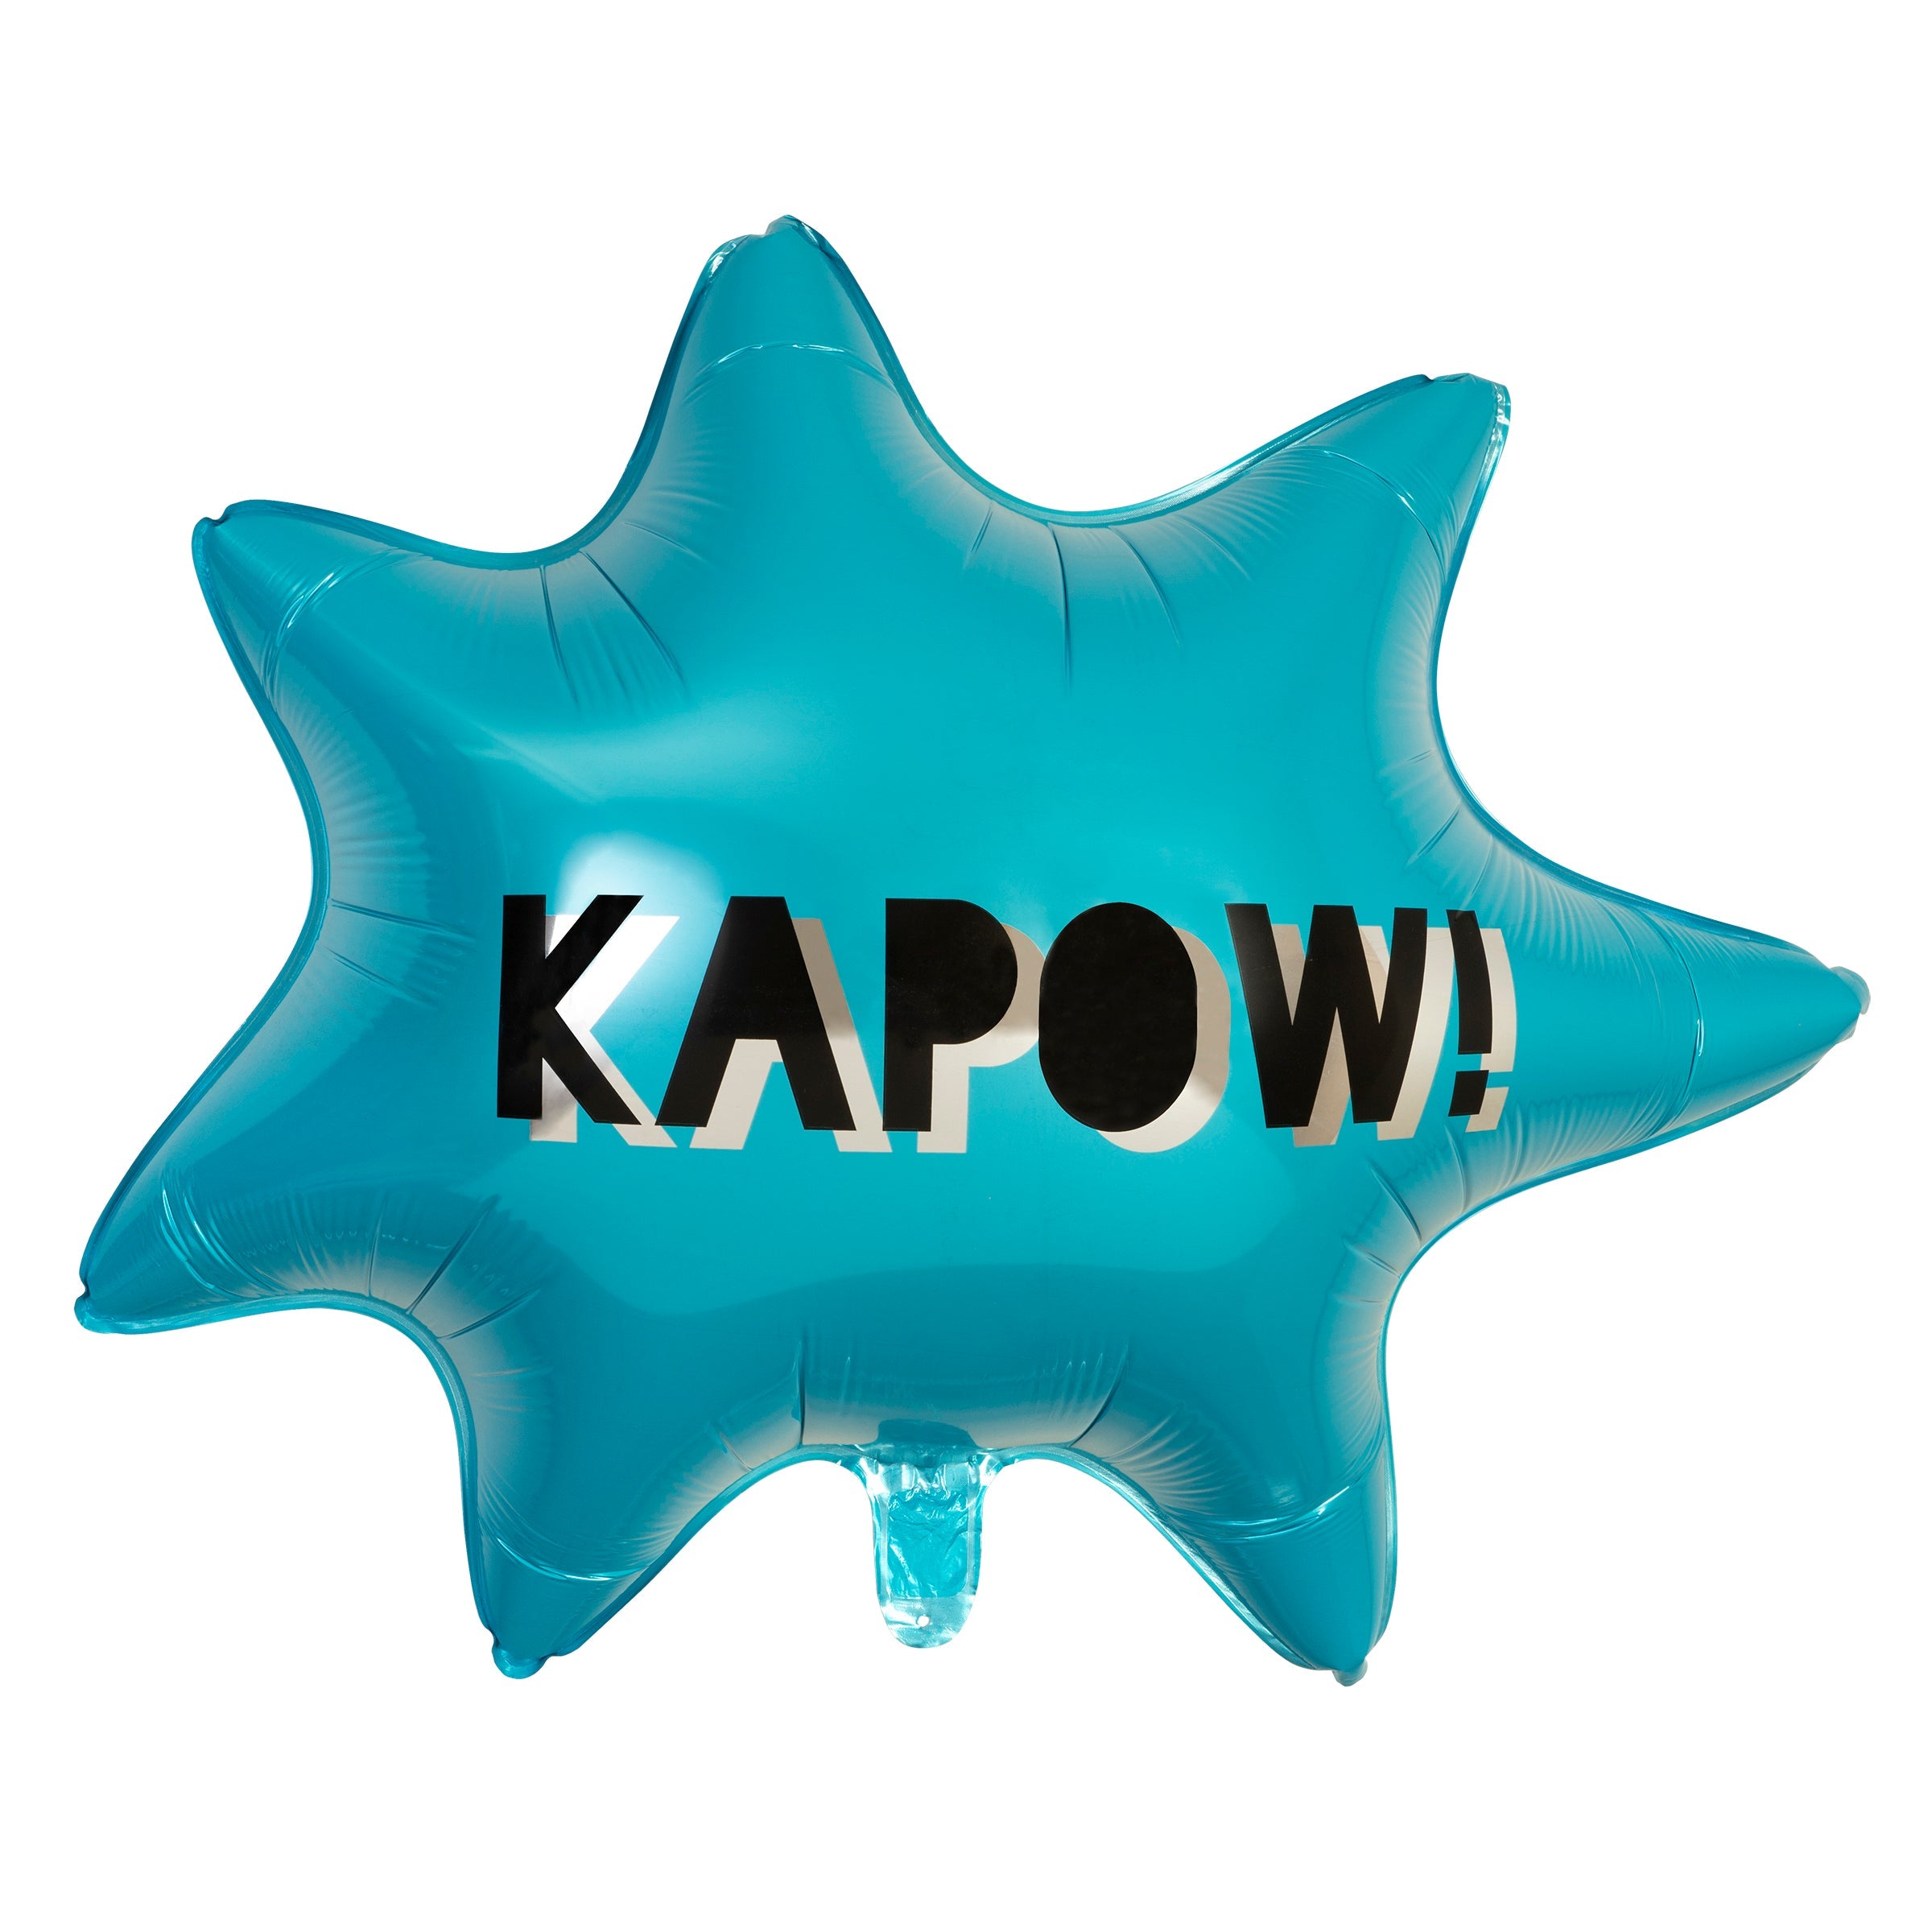 If you're looking for superhero party ideas you'll love our special foil balloon,with a fun Kapow! statement.